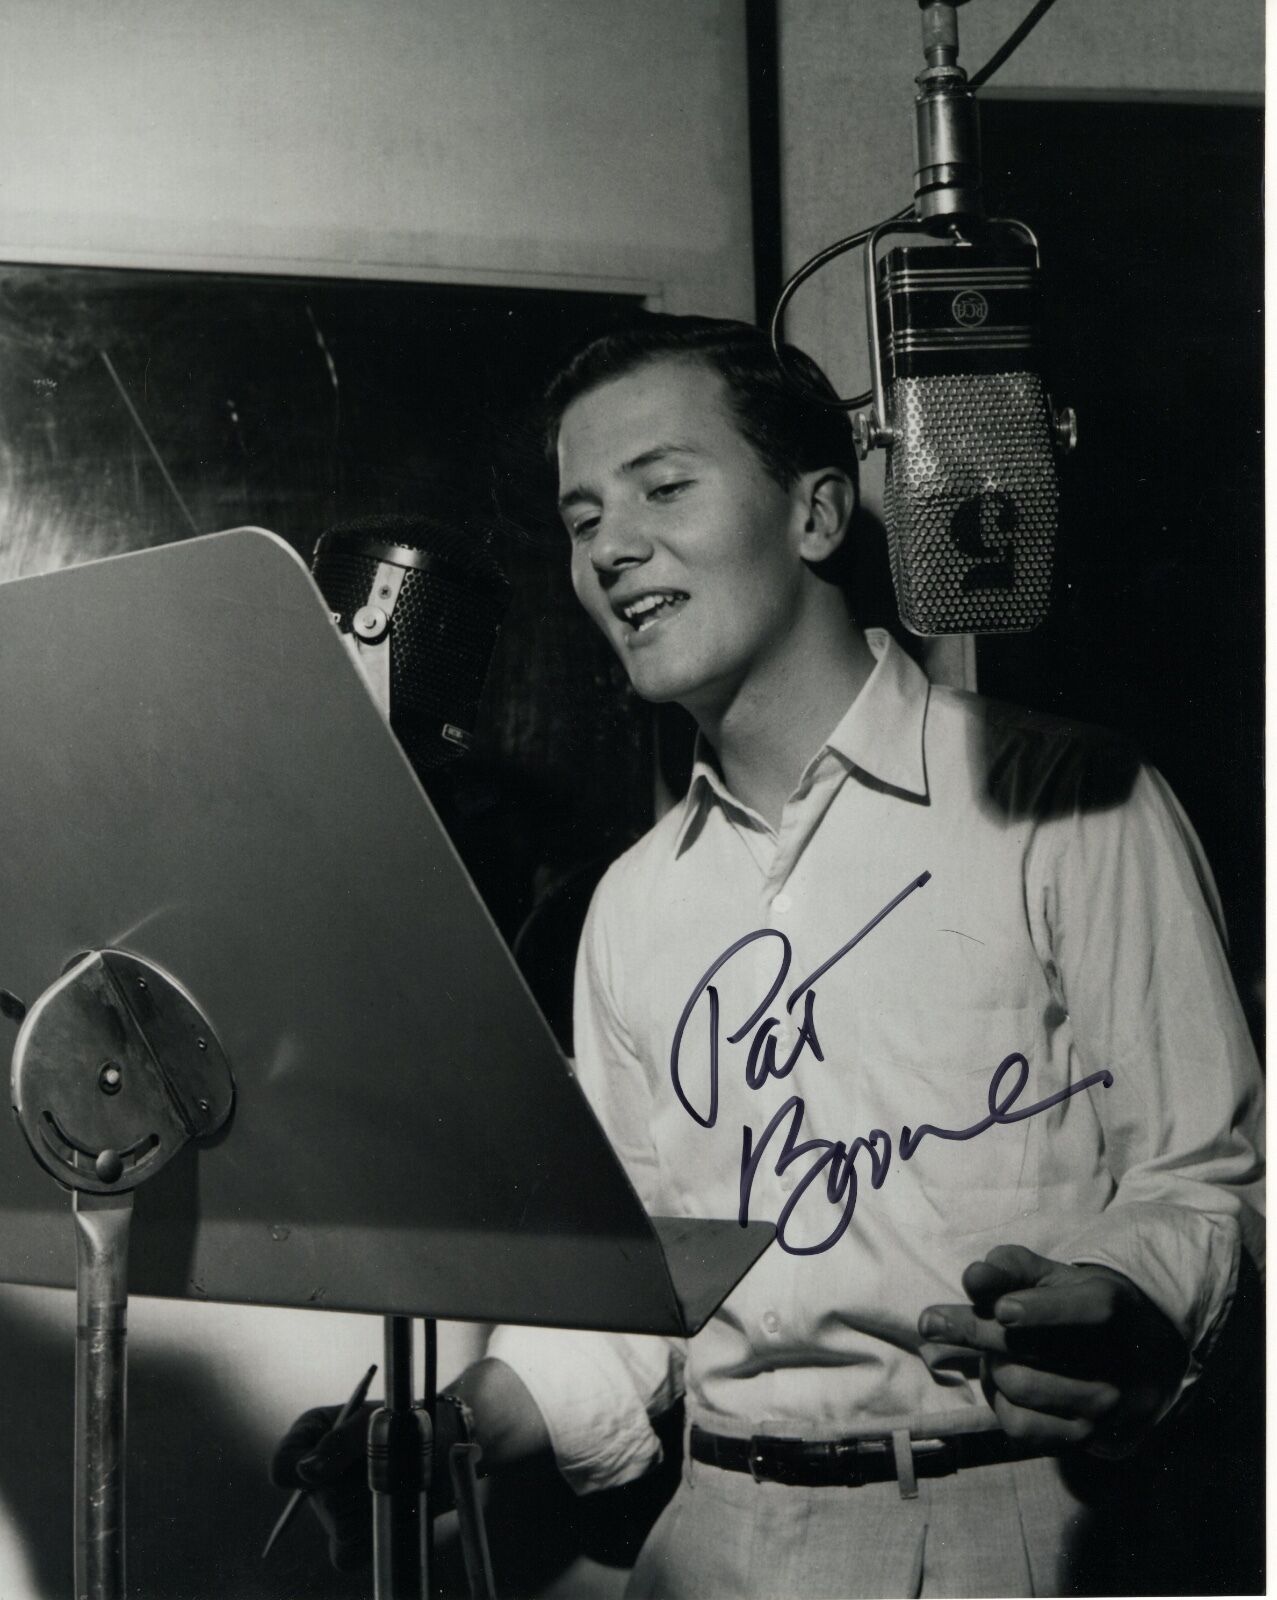 PAT BOONE HAND SIGNED 8×10 PHOTO+COA AMAZING POSE HANDSOME YOUNG SINGER COLLECTIBLE MEMORABILIA